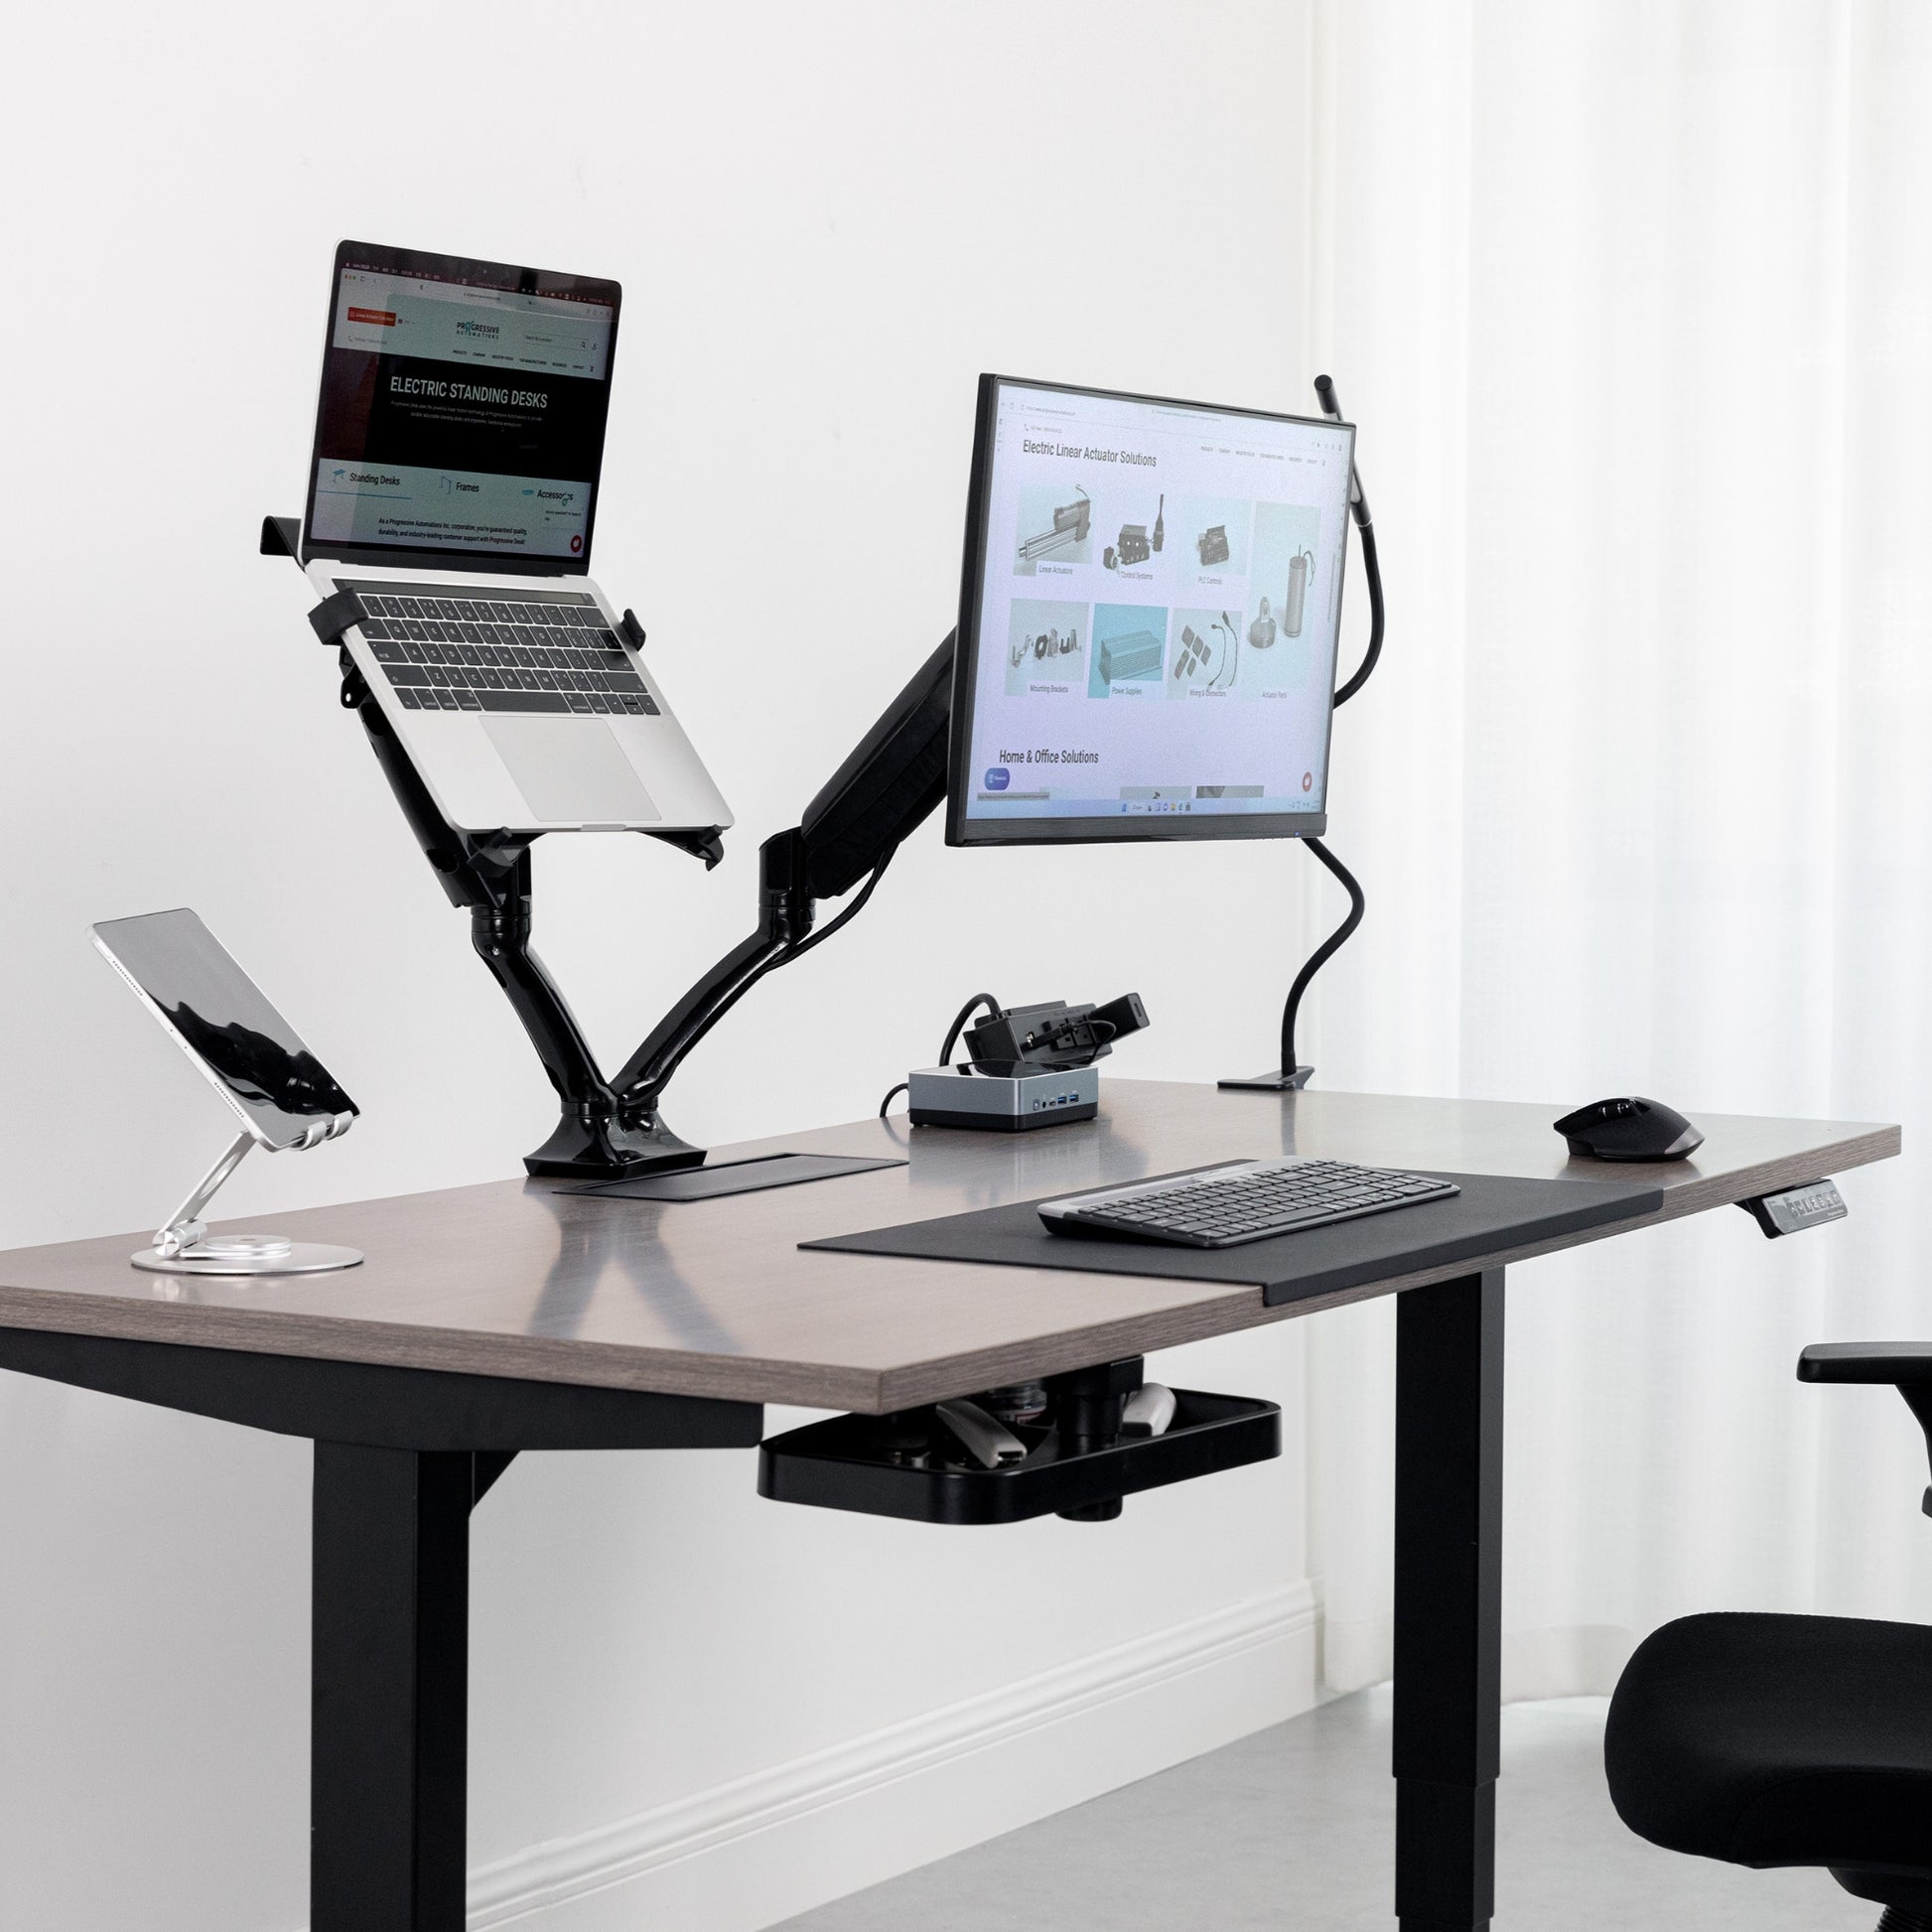 Monitor Arm and Stand for Desk